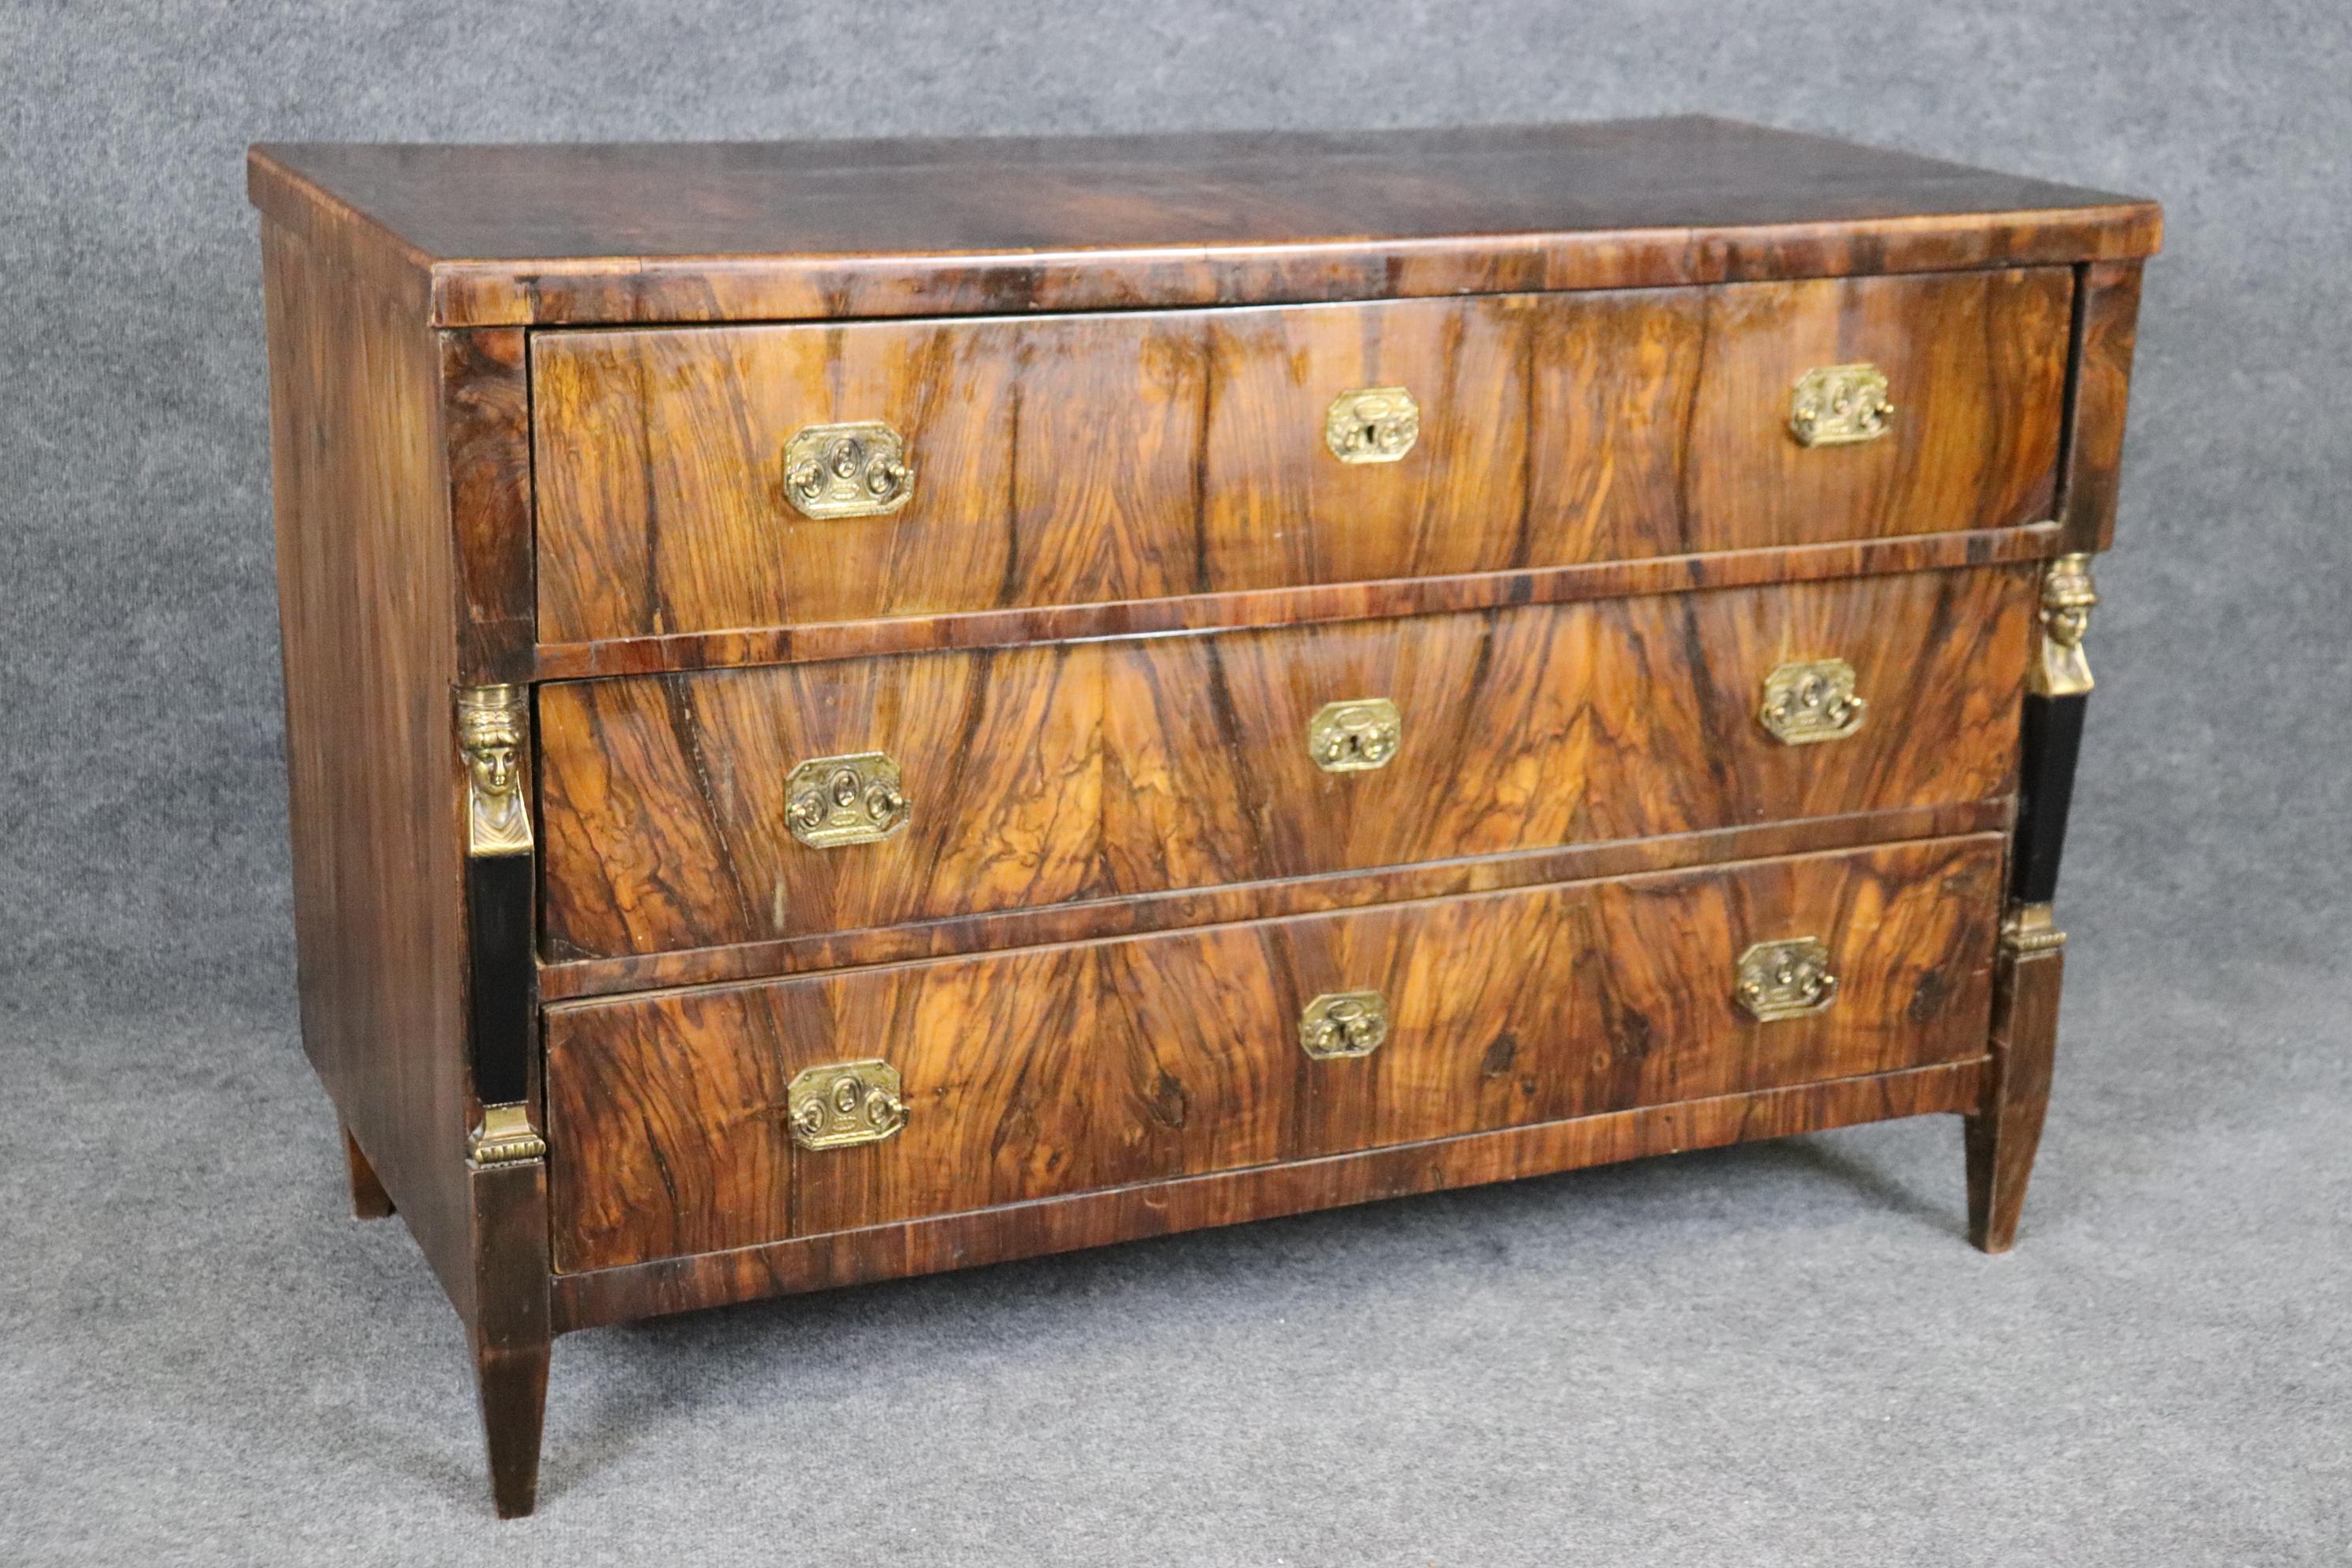 This is a fantastic, absolutely breathtaking Circassian Walnut with incredible contrasts of blacks and browns that are remiscient of rosewood. The piece features bronze figural caryatids and are surmounted towards the middle of the sides rather than